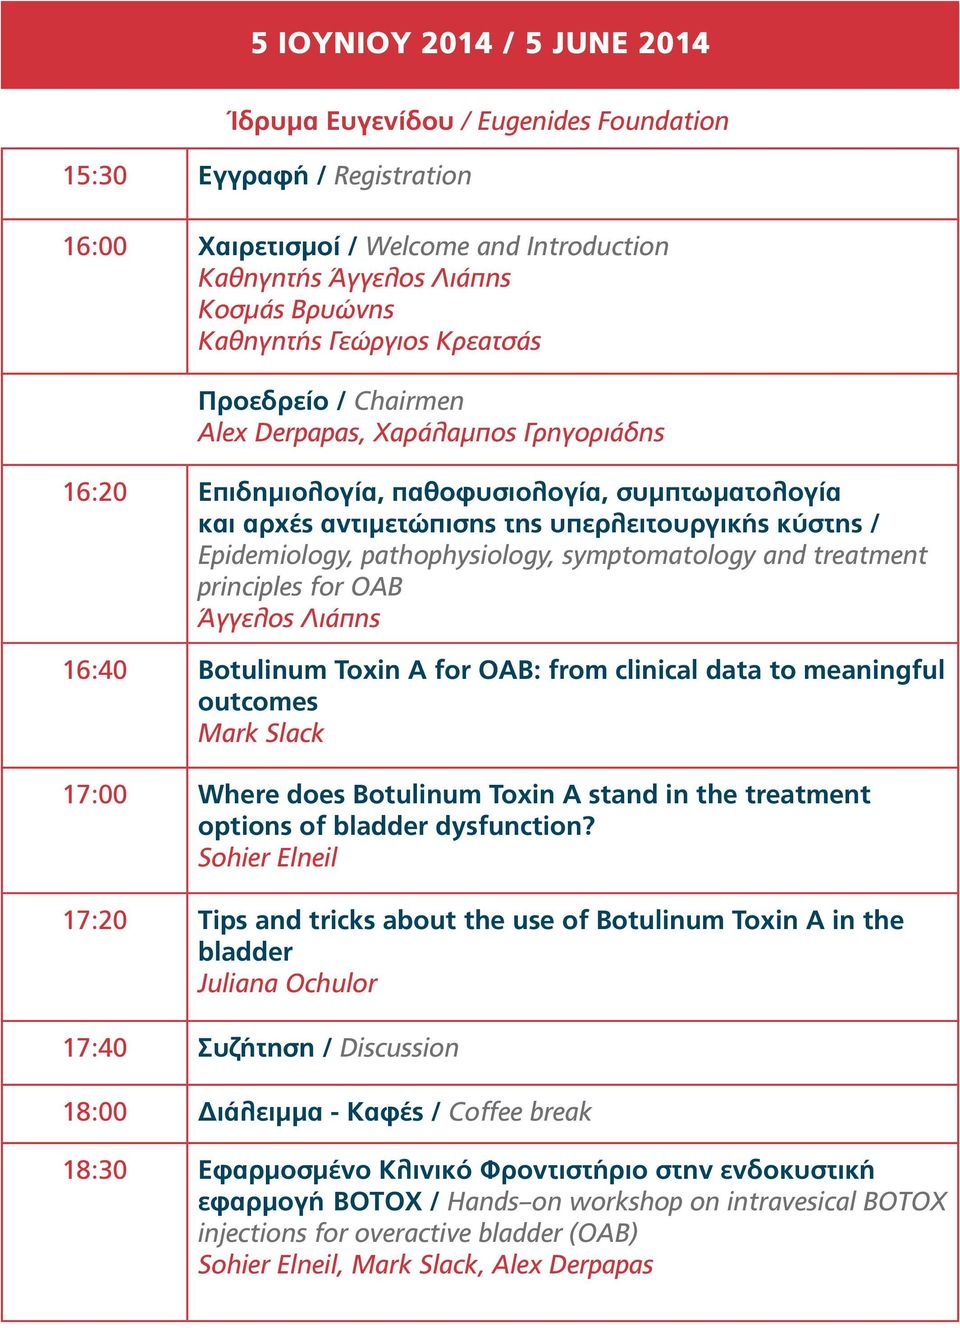 symptomatology and treatment principles for OAB 16:40 Botulinum Toxin A for OAB: from clinical data to meaningful outcomes Mark Slack 17:00 Where does Botulinum Toxin A stand in the treatment options